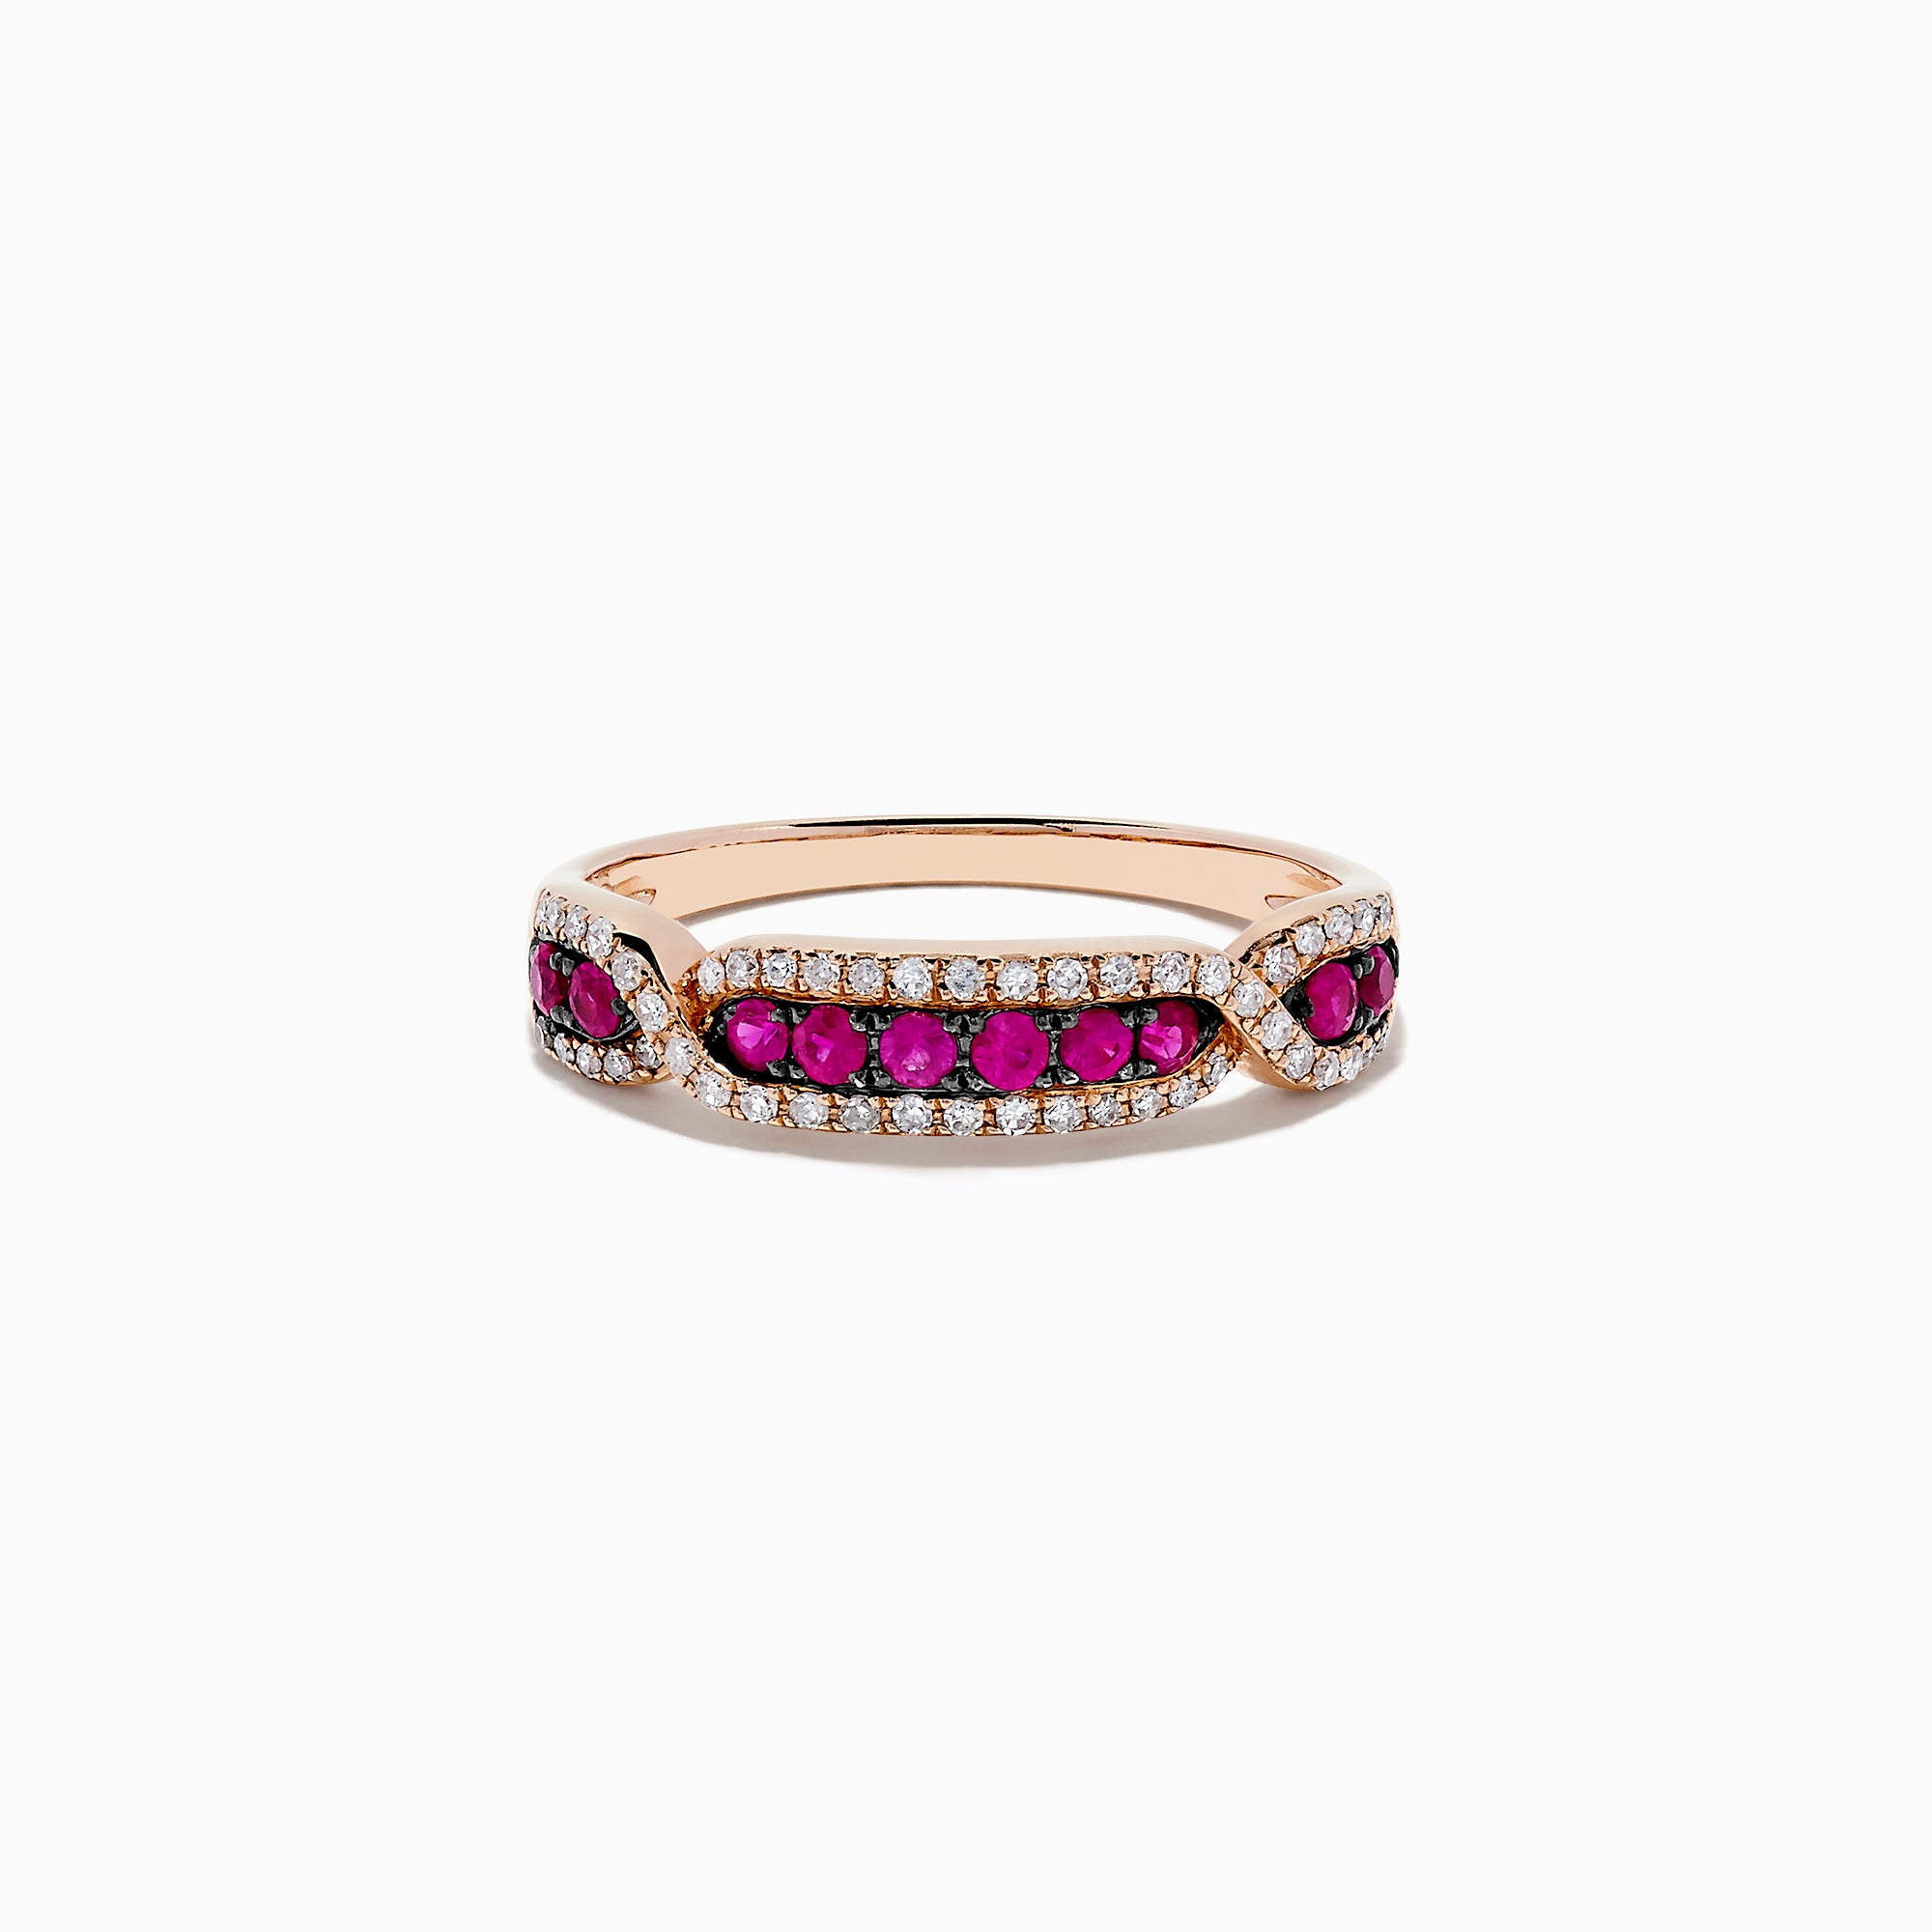 Effy Ruby Royale 14K Rose Gold Ruby and Diamond Ring, 0.44 TCW